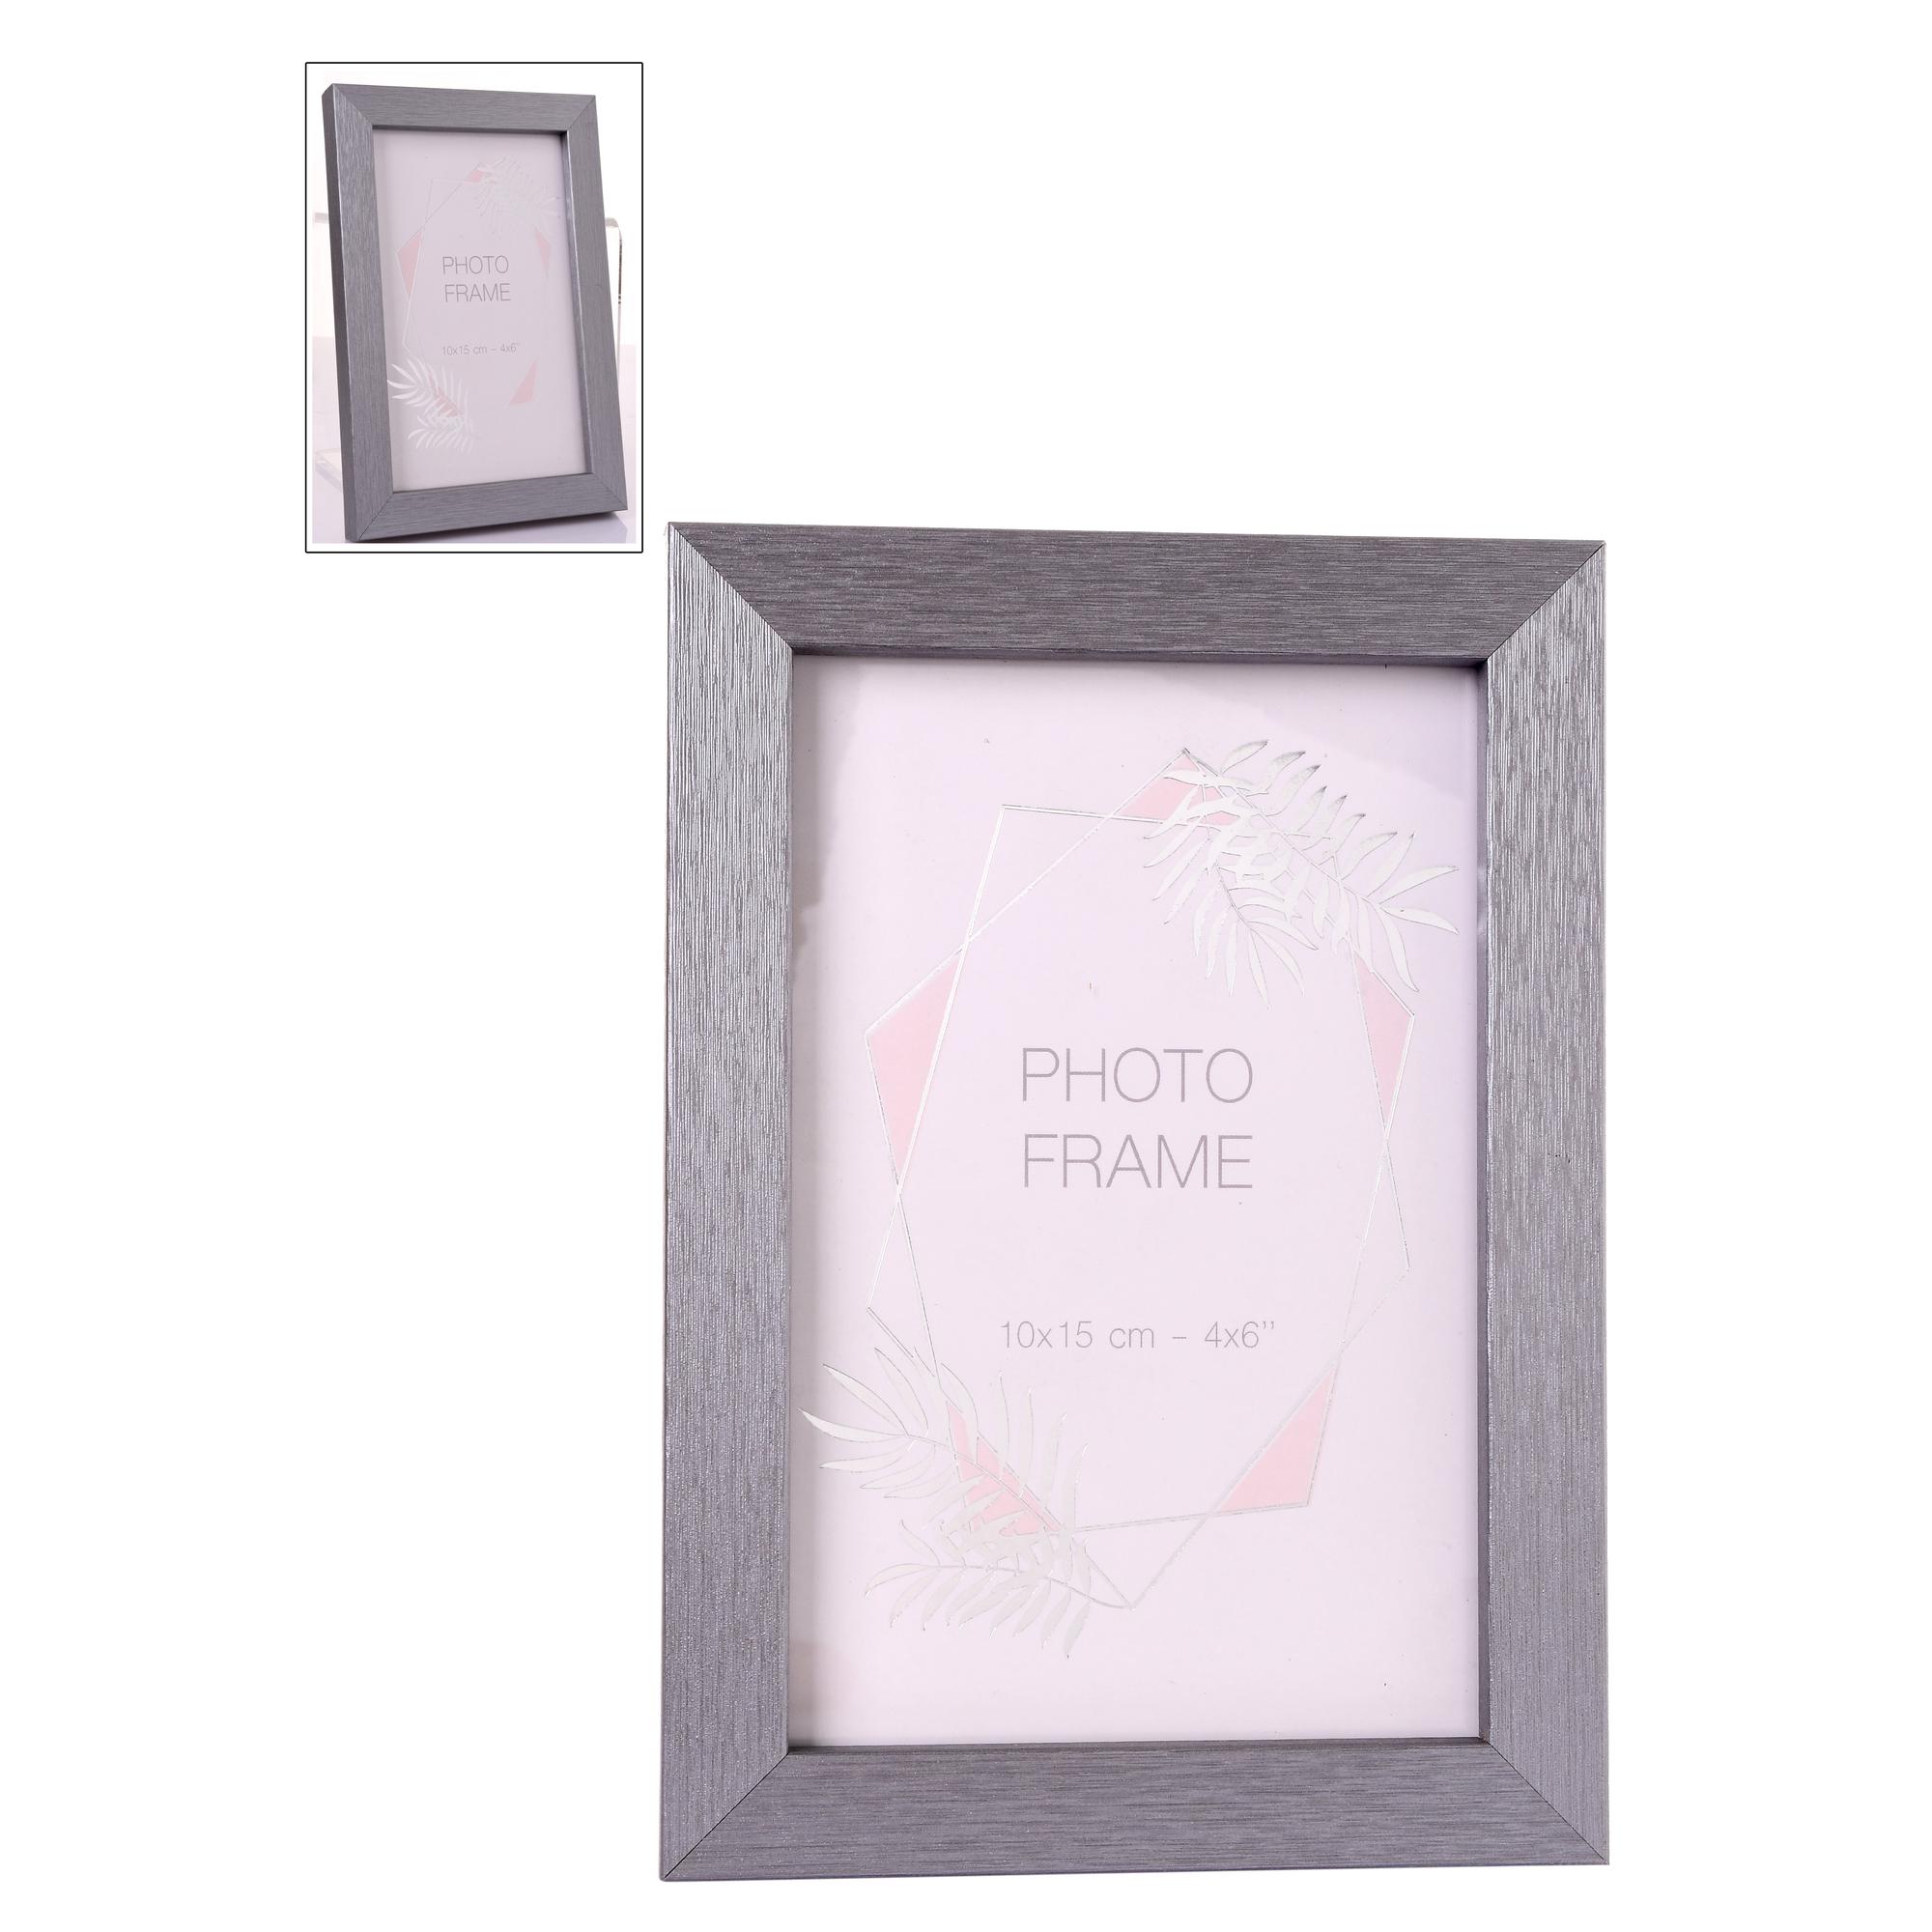 4X6 PICTURE FRAME - 531-26226